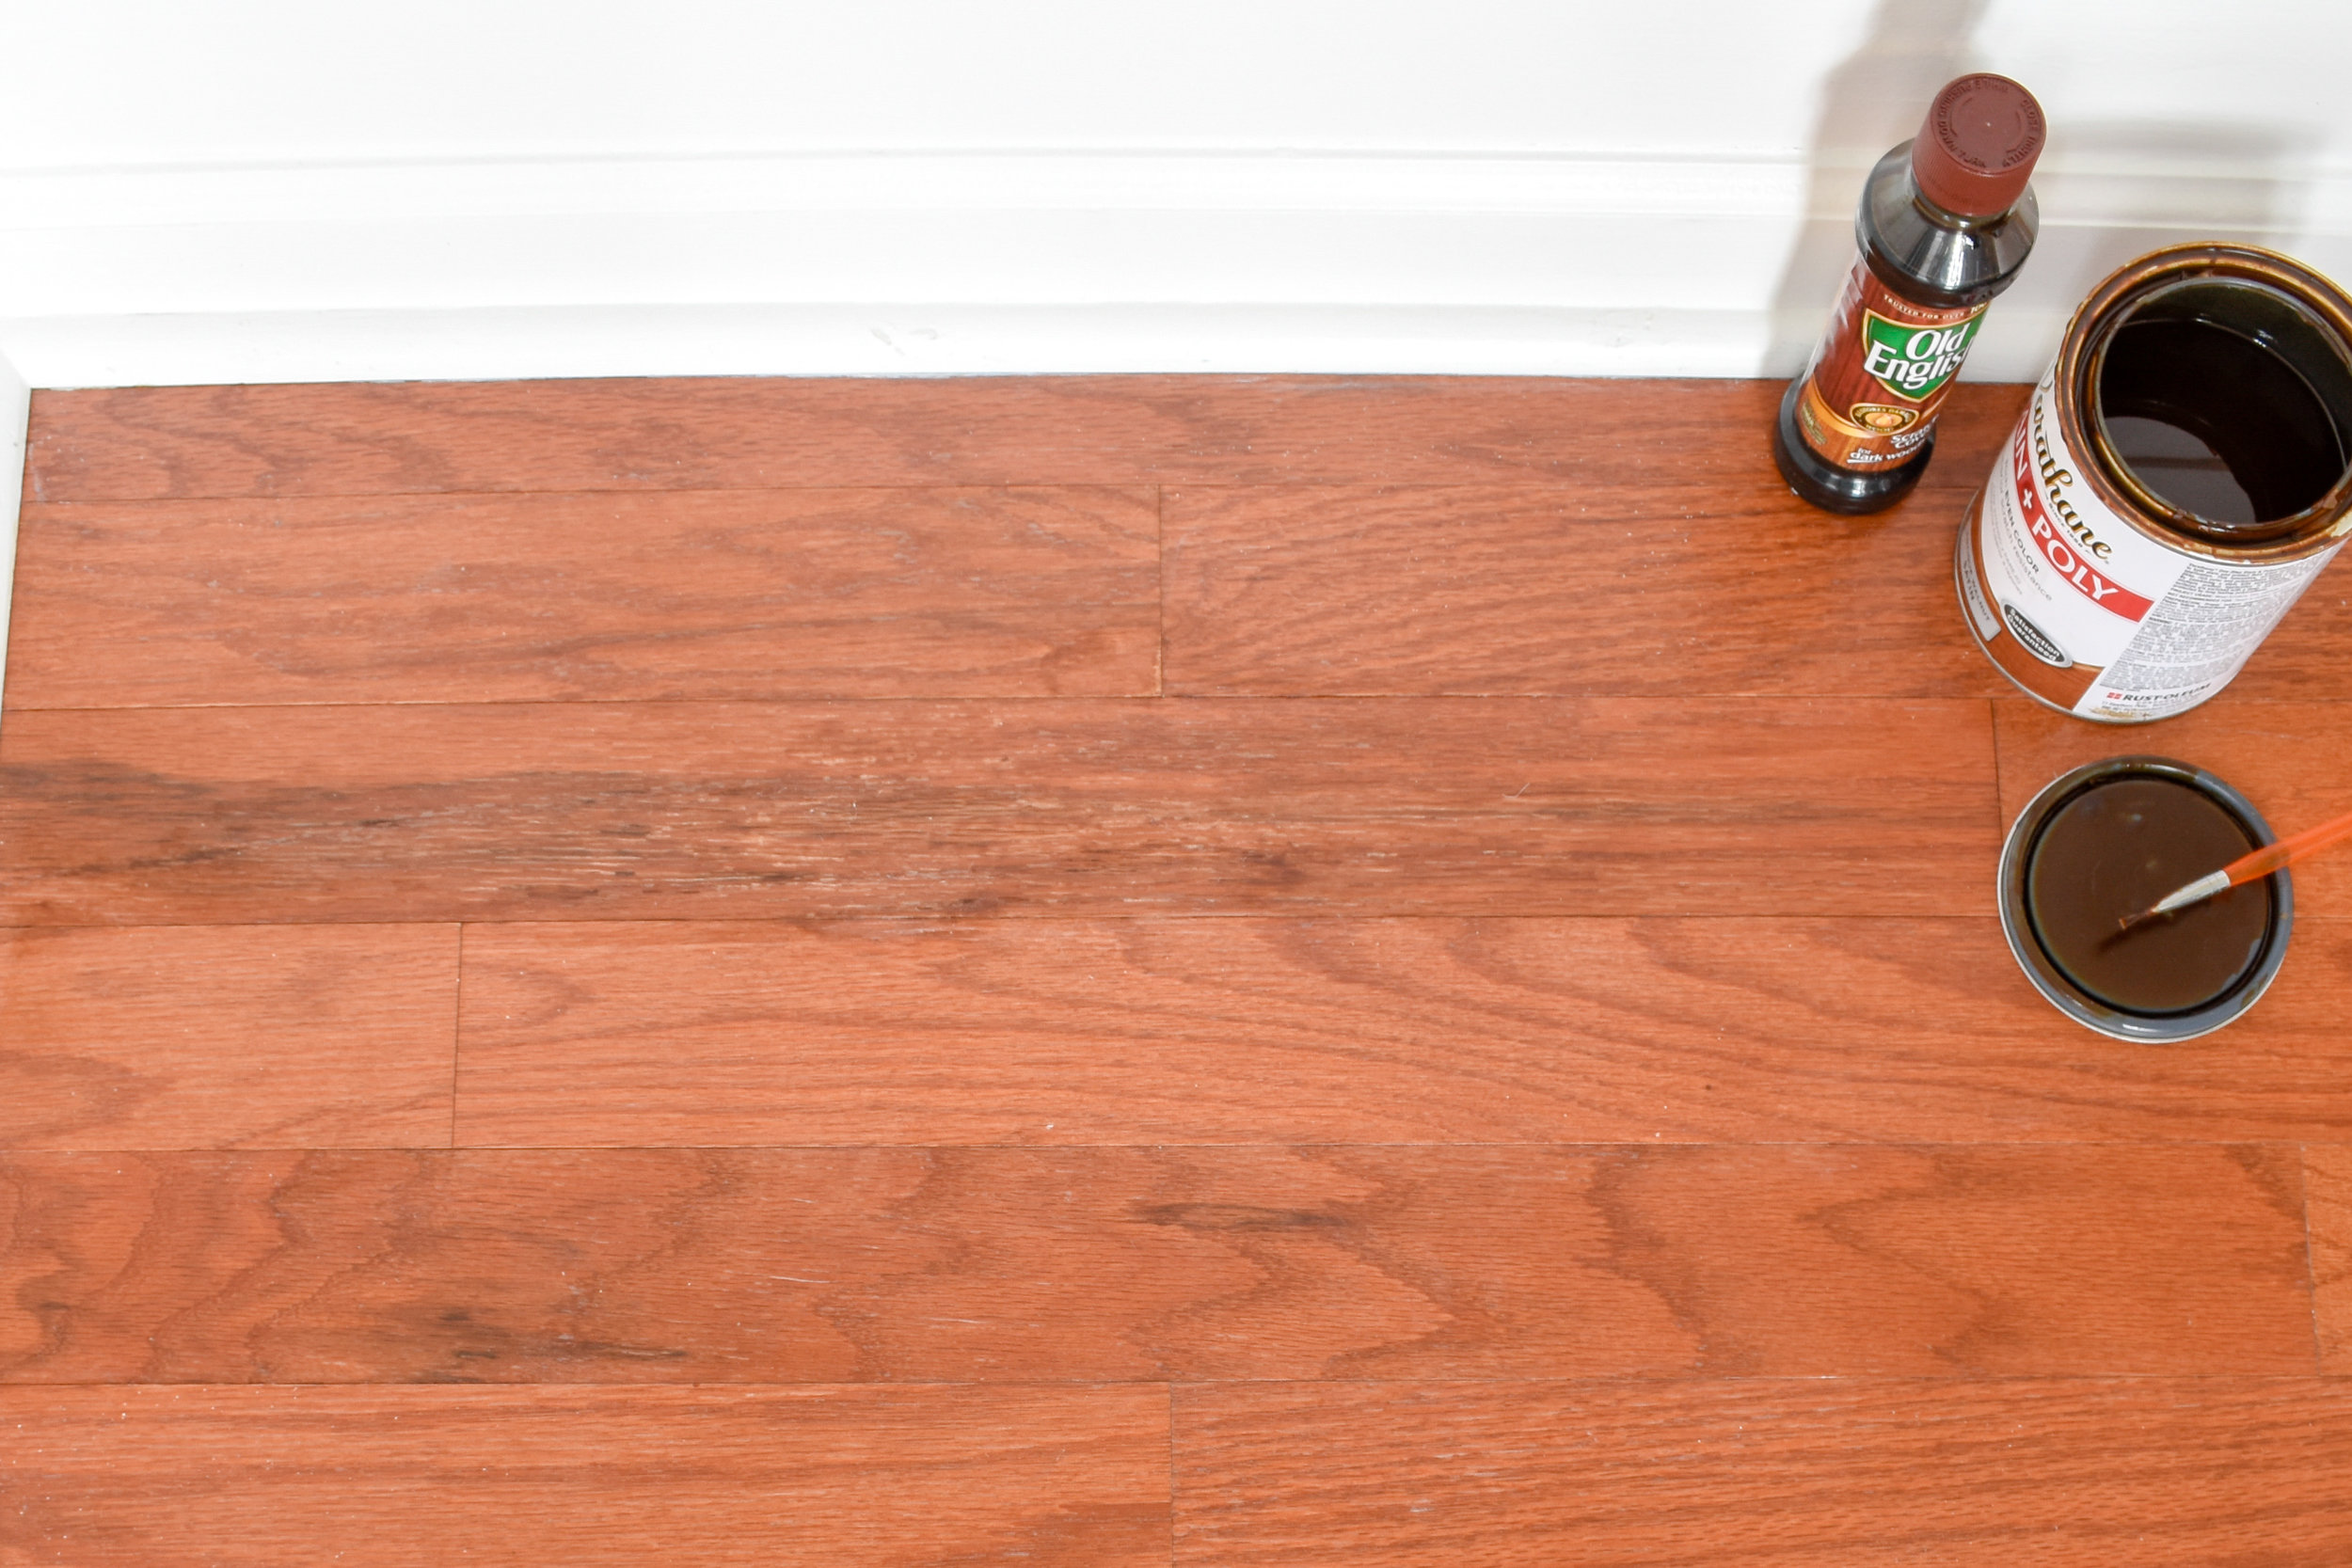 How To Make Old Hardwood Floors Shine, How Can I Make My Old Hardwood Floors Shine